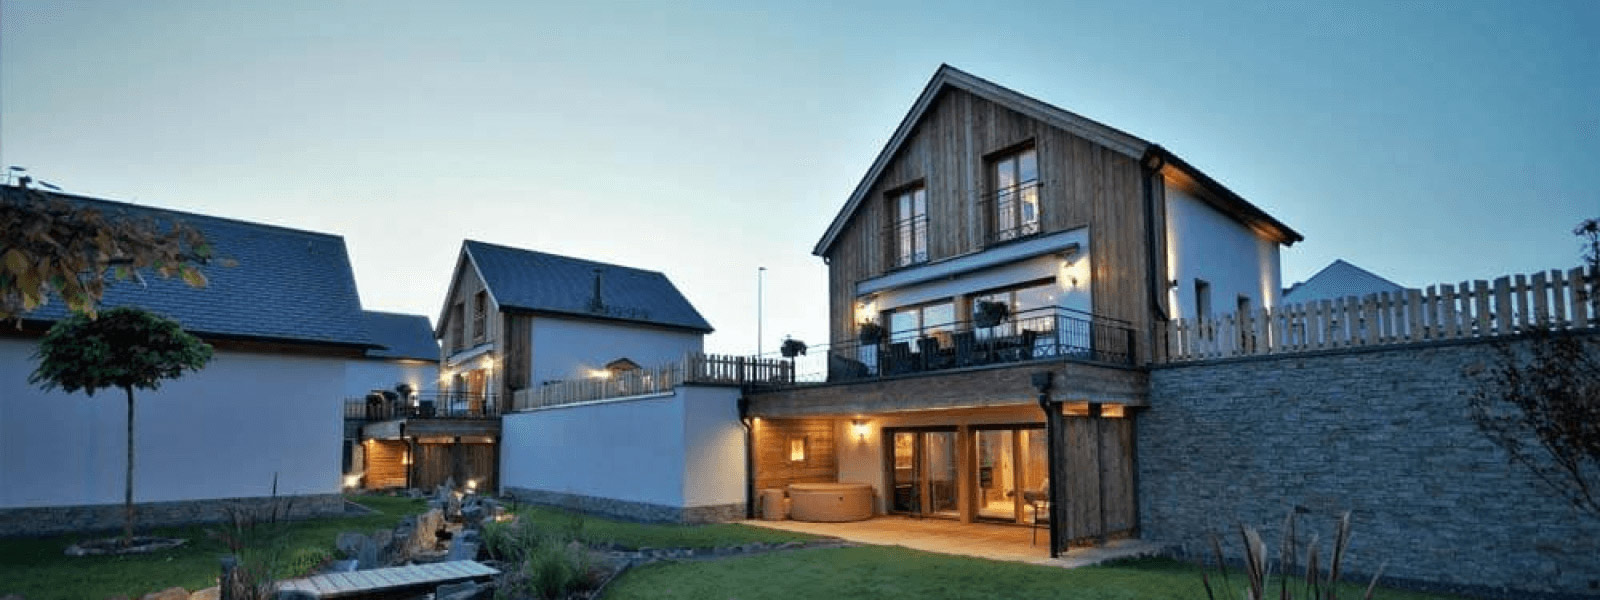 Chalets Petry - Chalet Mosel